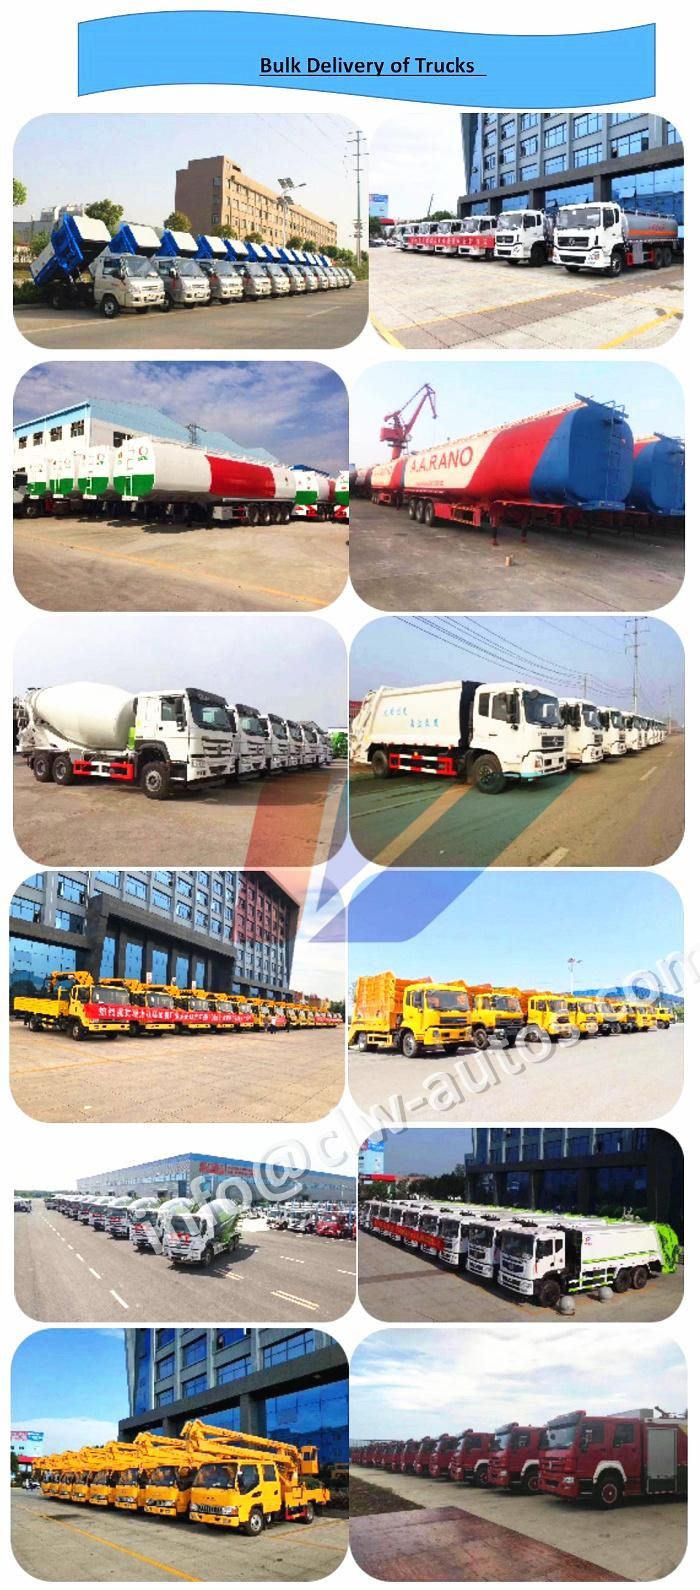 Dongfeng Small Vacuum Truck 5m3 High Pressure Cleaning Sewage Suction Tanker Truck